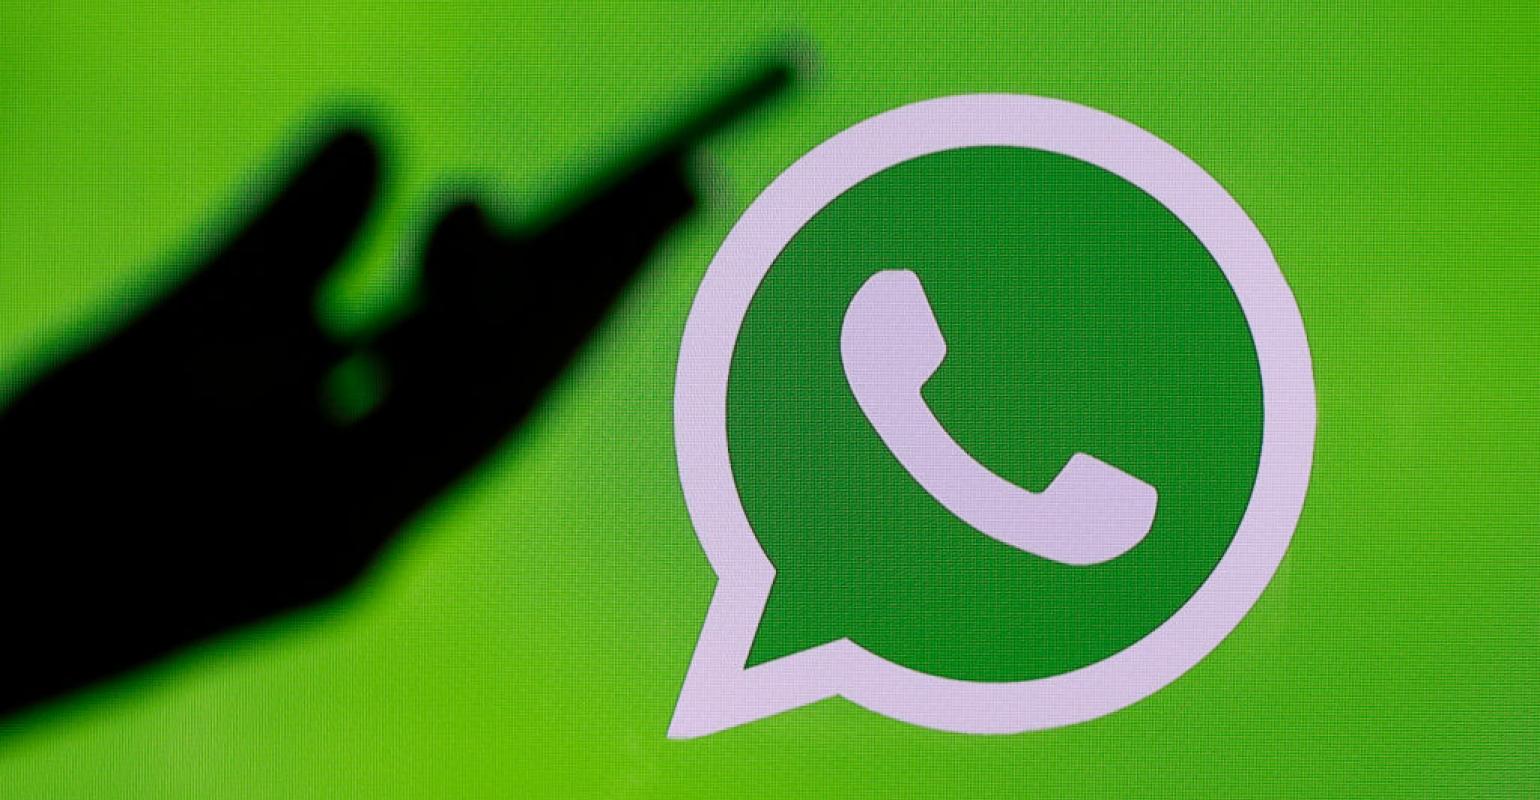 WhatsApp: What is drunk mode and how does it work?